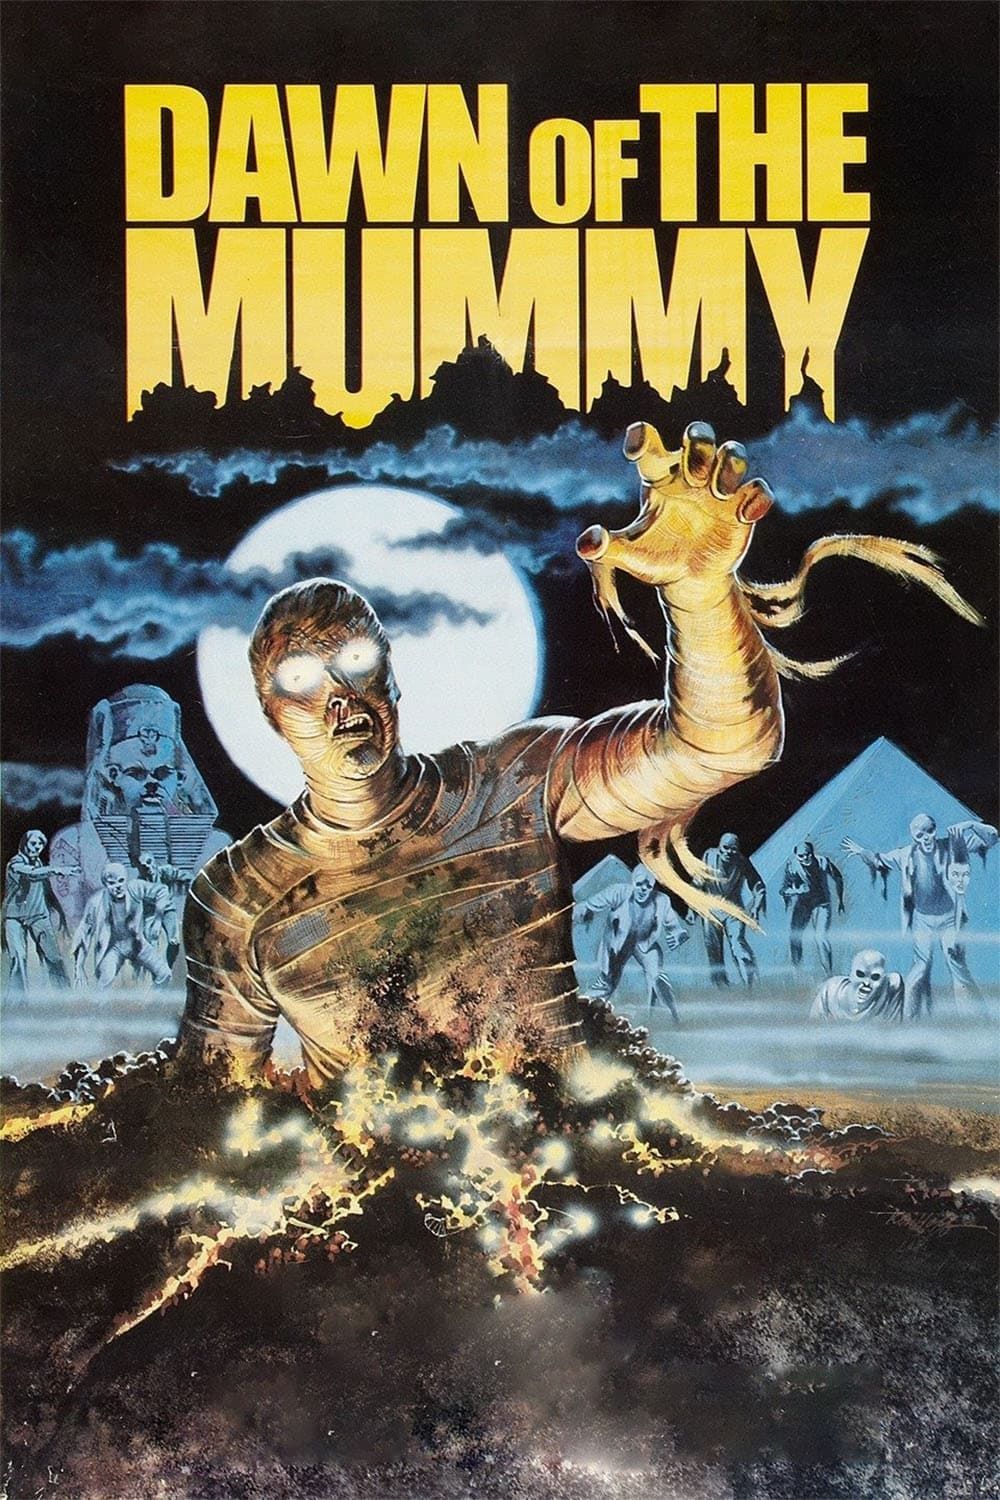 brandon pesic recommends The Mummy Full Movie Online